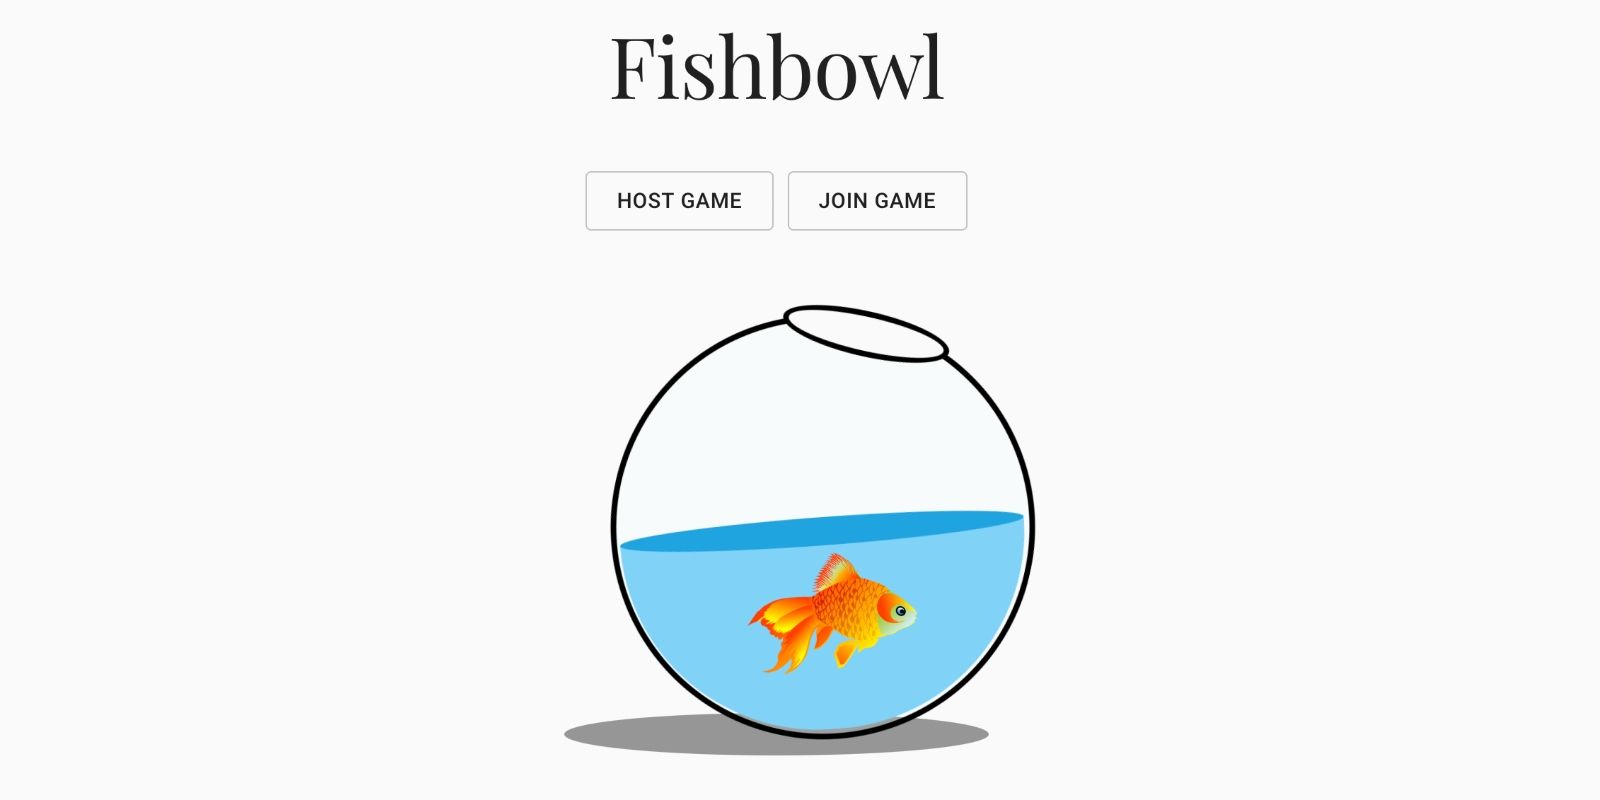 A goldfish in a tilted bowl in Fishbowl game